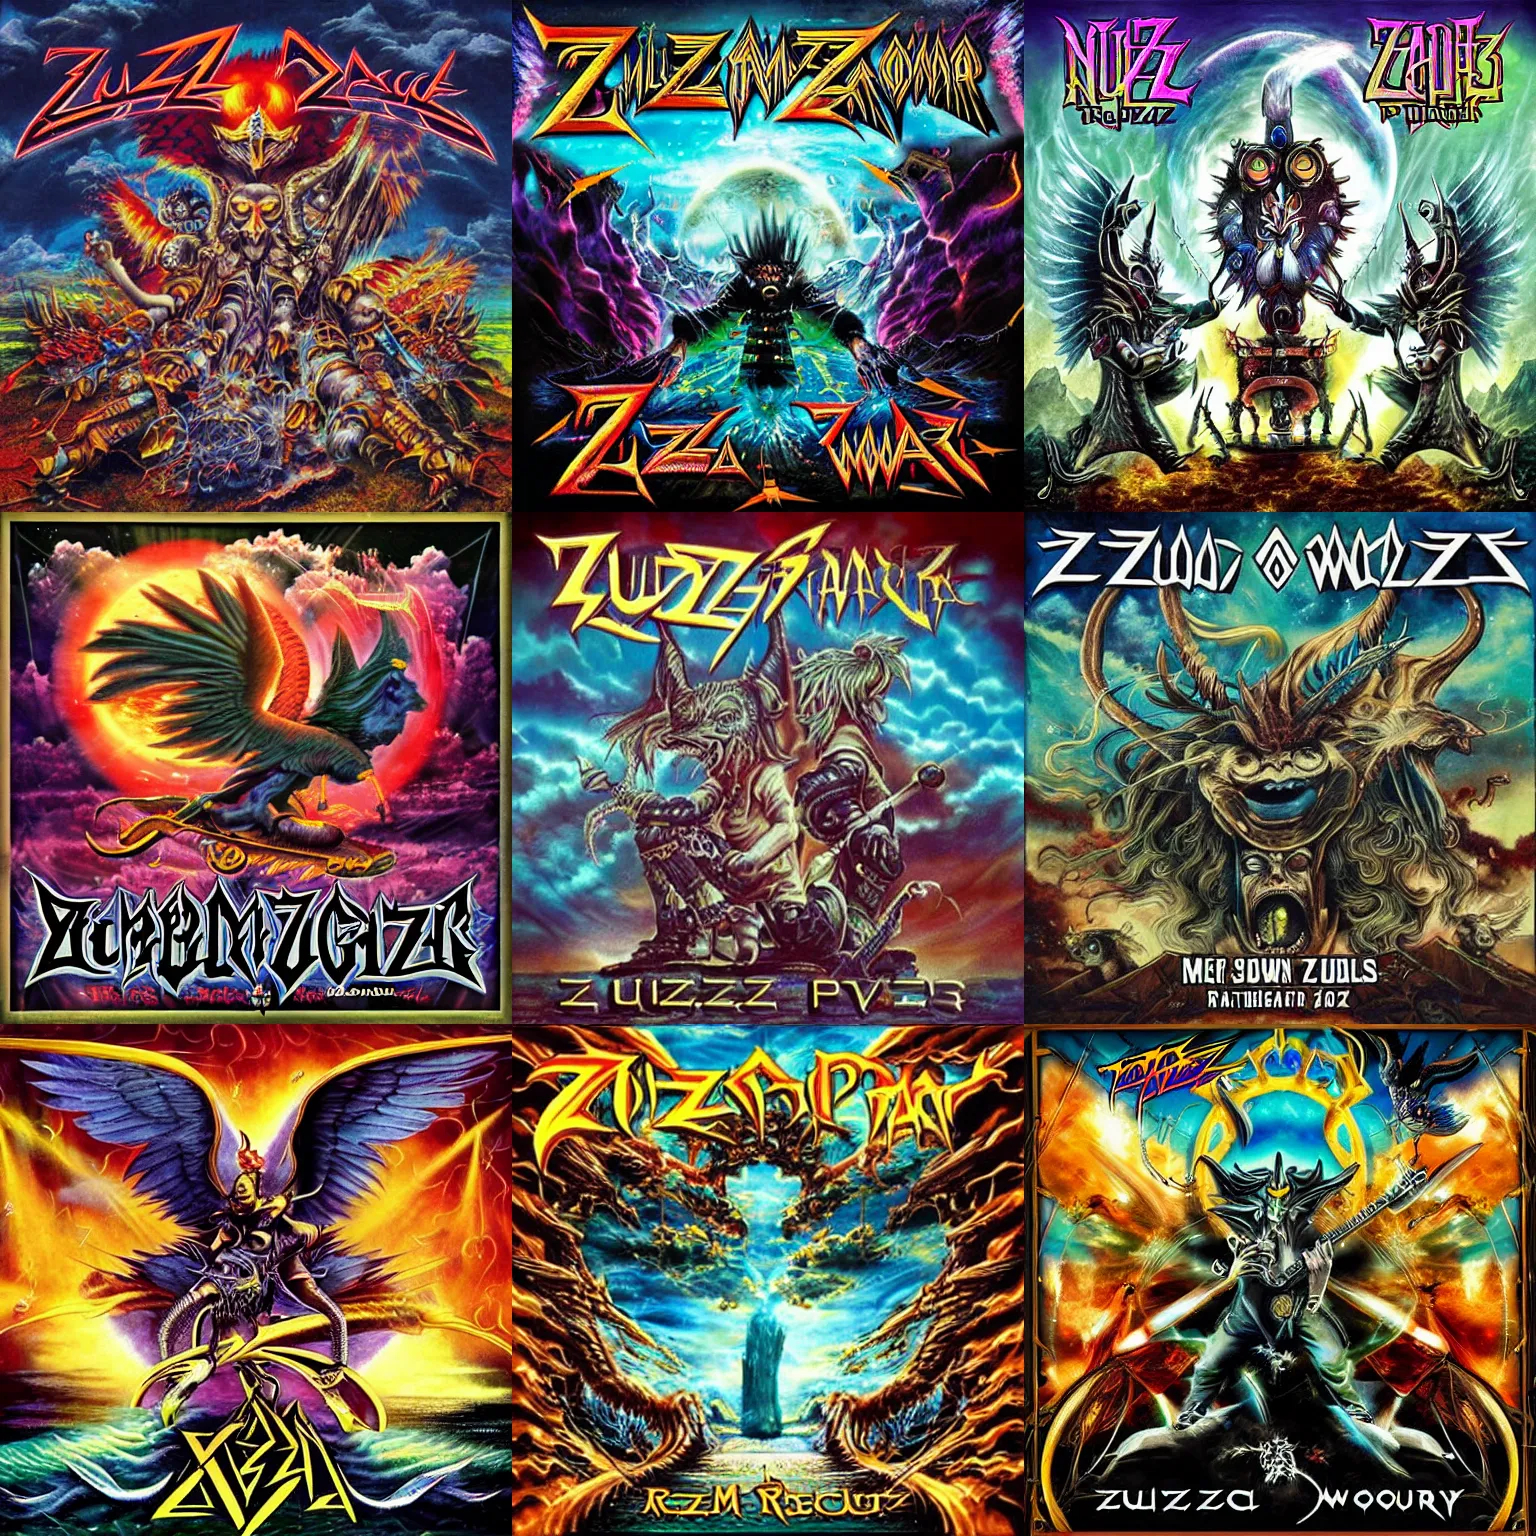 Prompt: the coolest most radical zuzzy zazz power metal album art to ever be created and witnessed by mere mortals